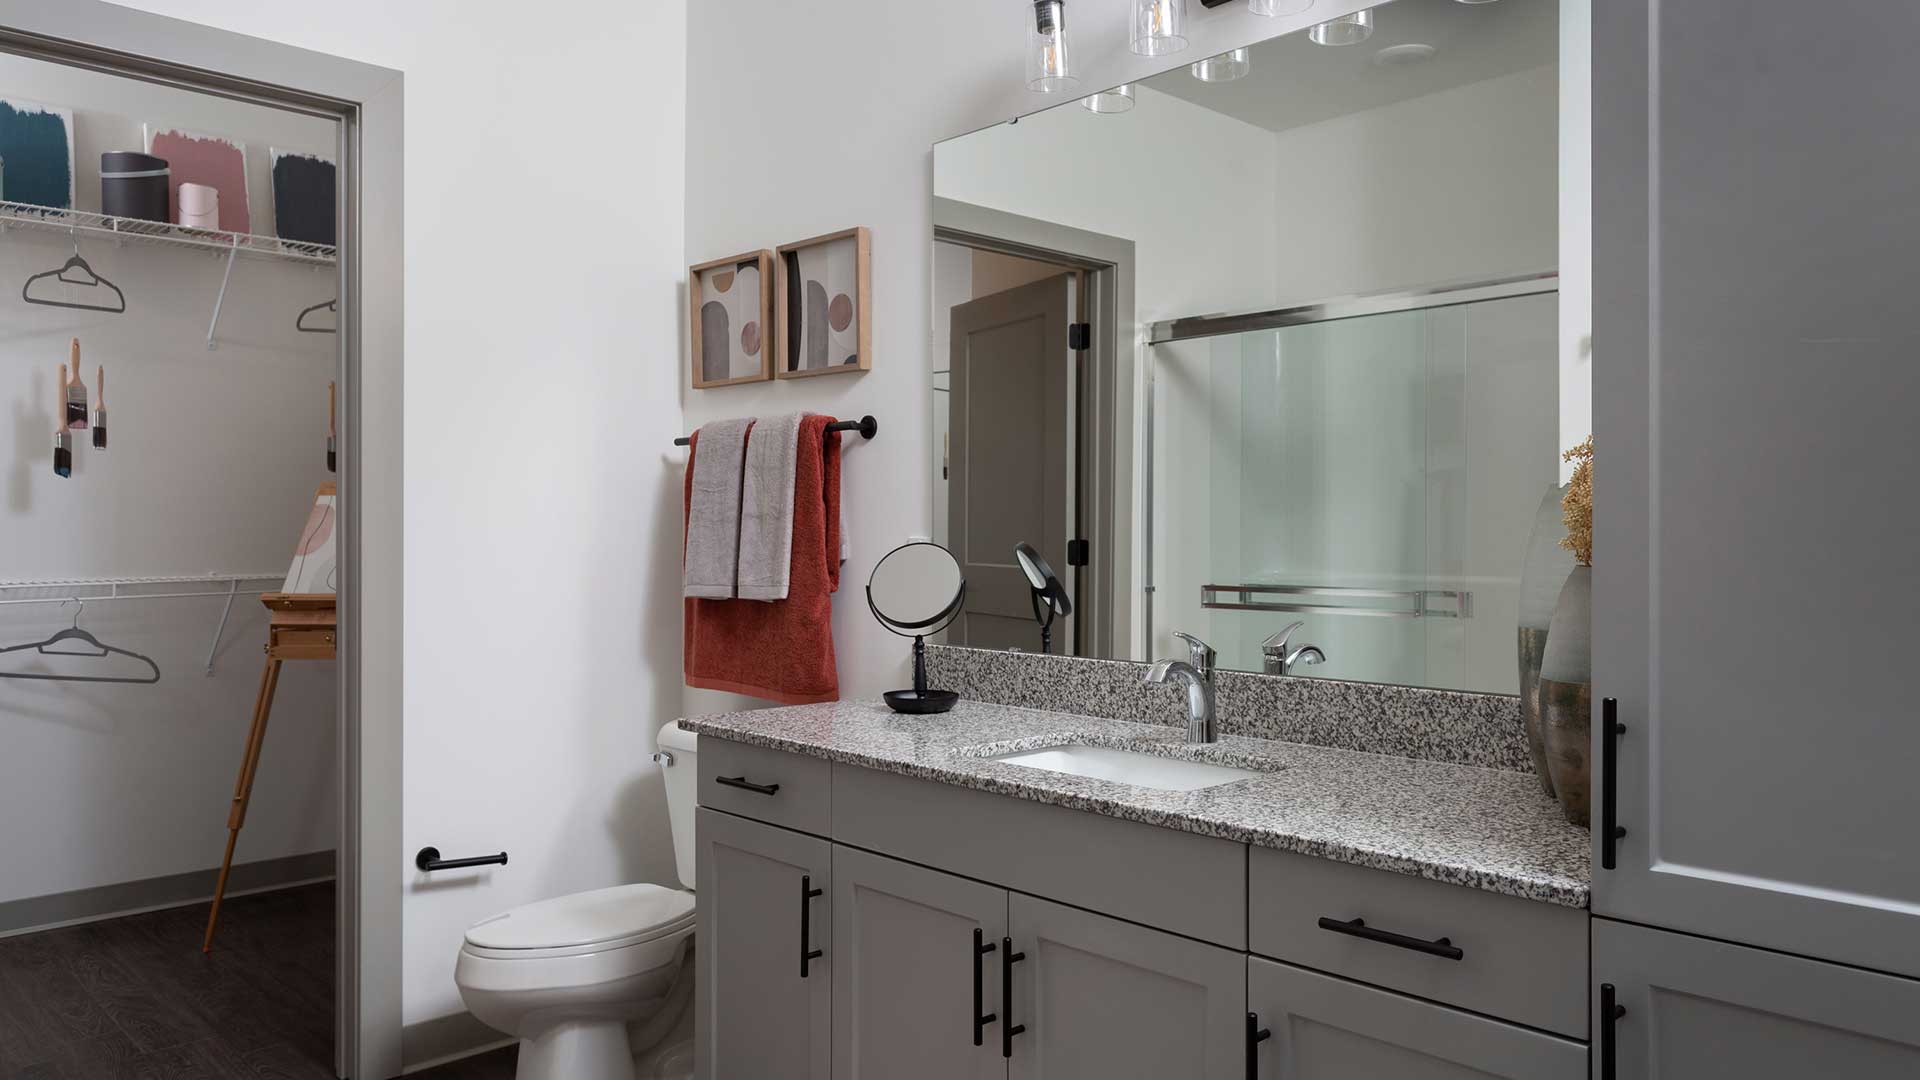 A residence bathroom with the vanity and mirror on the right wall and a walk-in closet on the left.